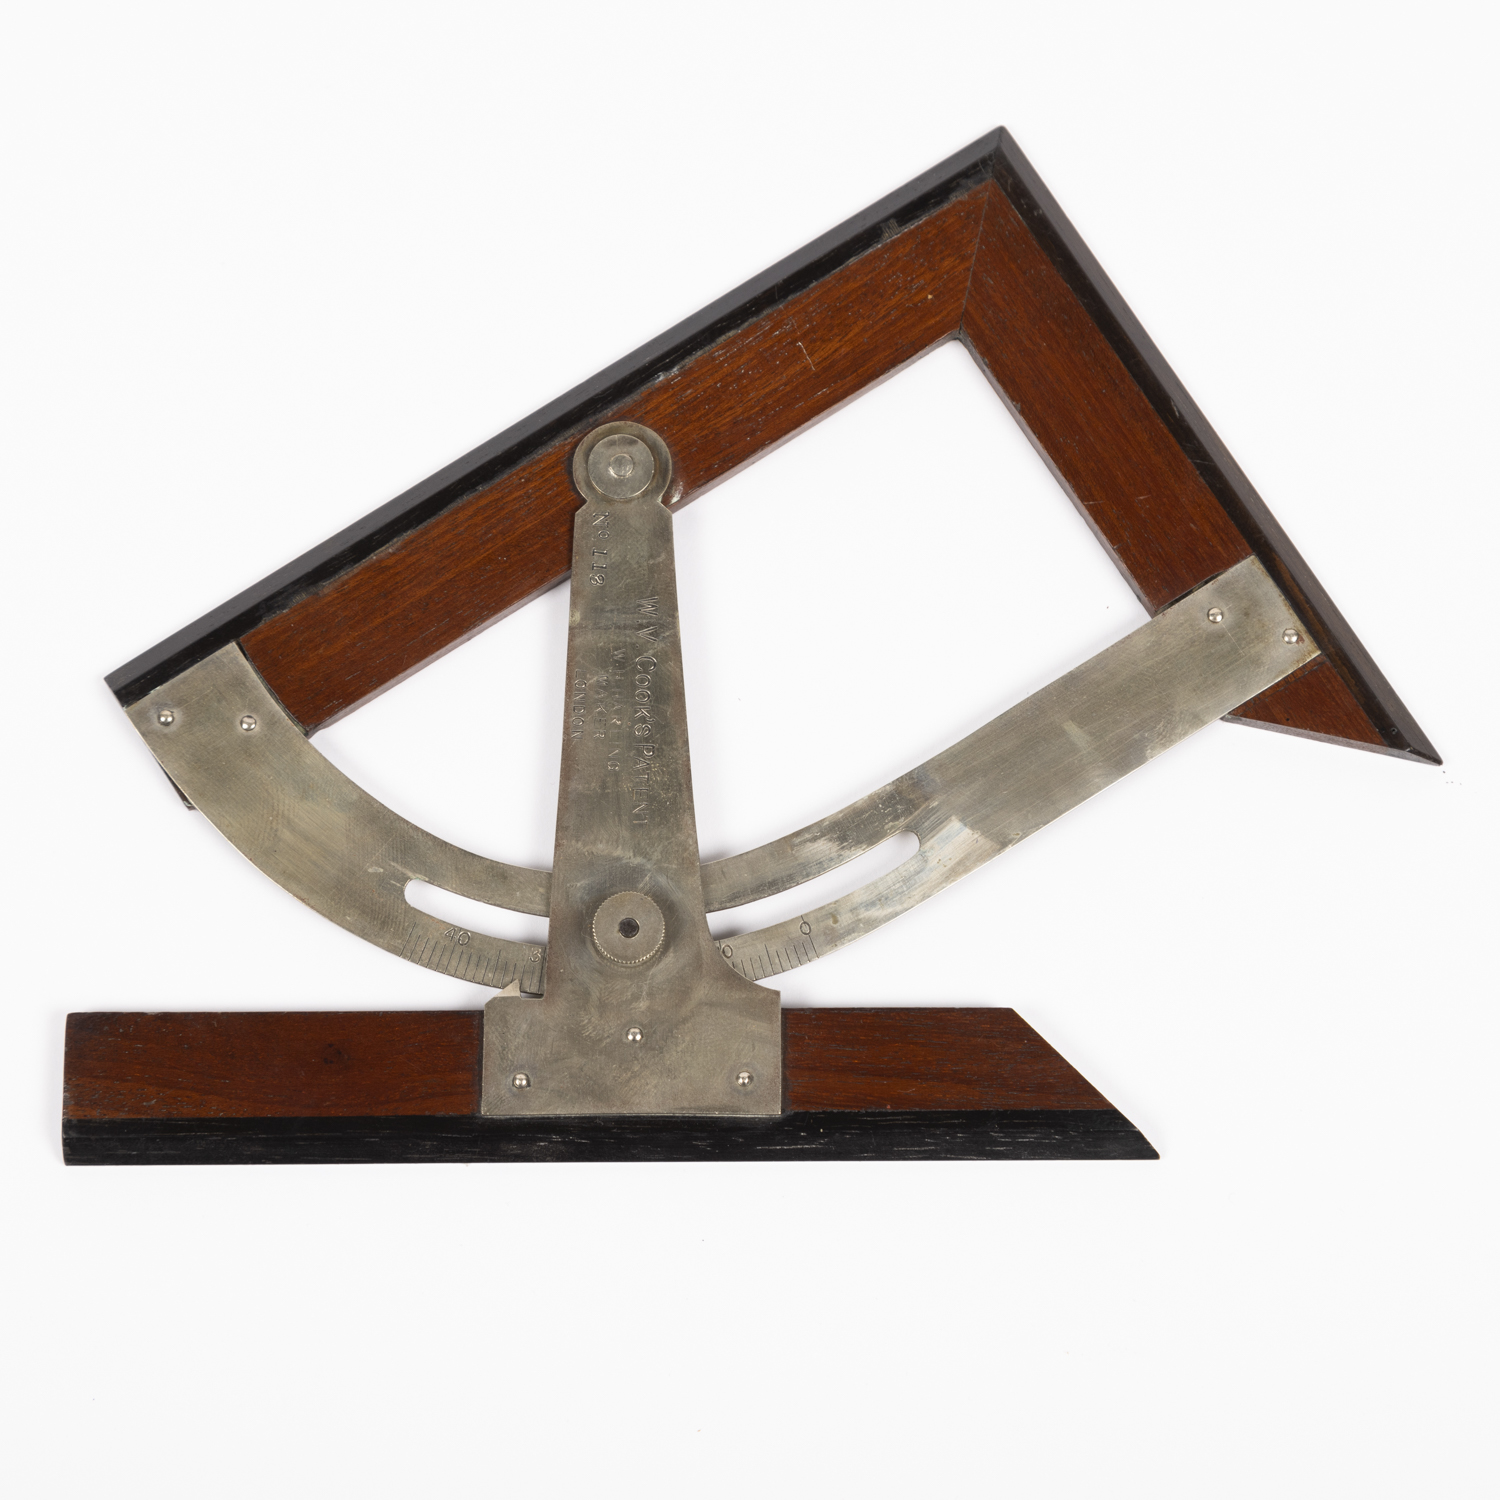 Cook’s patent clinometer by W. H. Harling